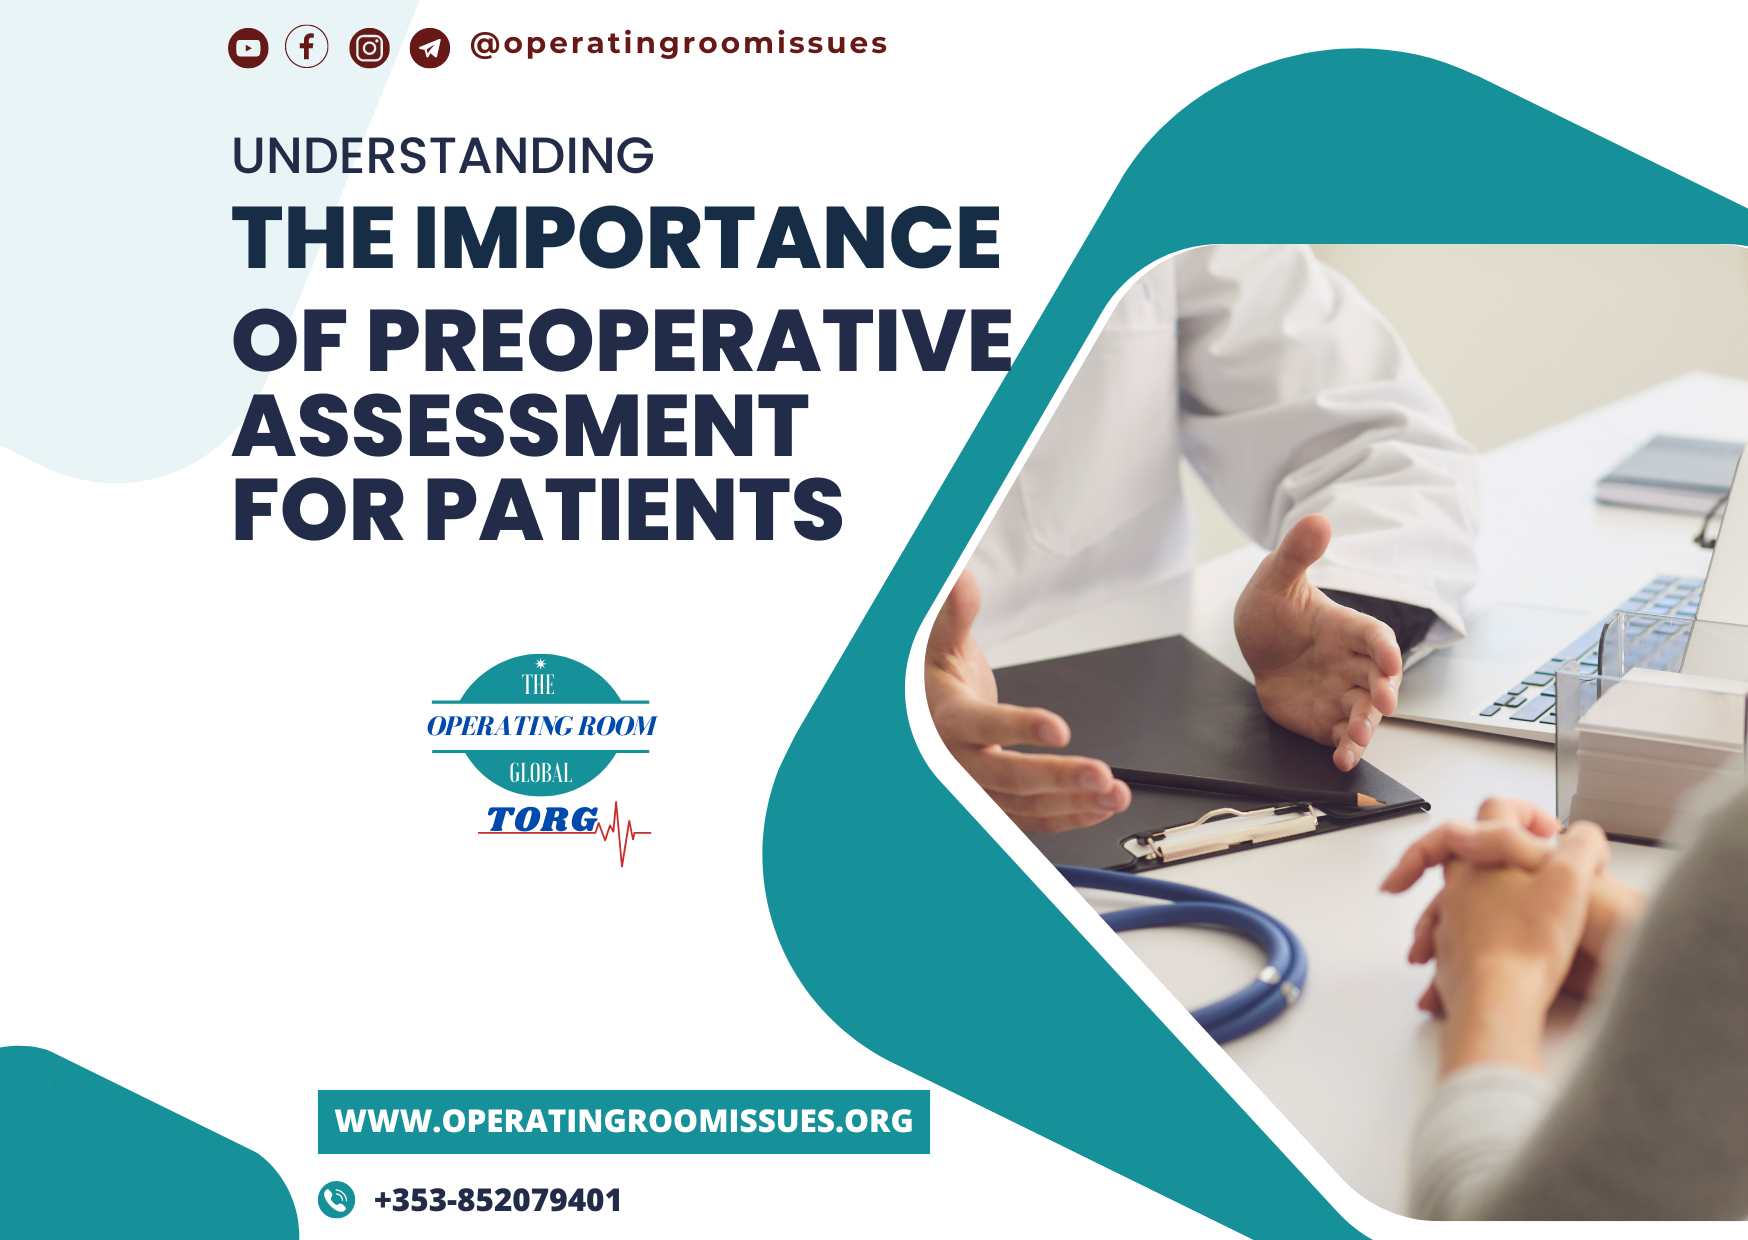 Understanding the Importance of Preoperative Assessment For Patients